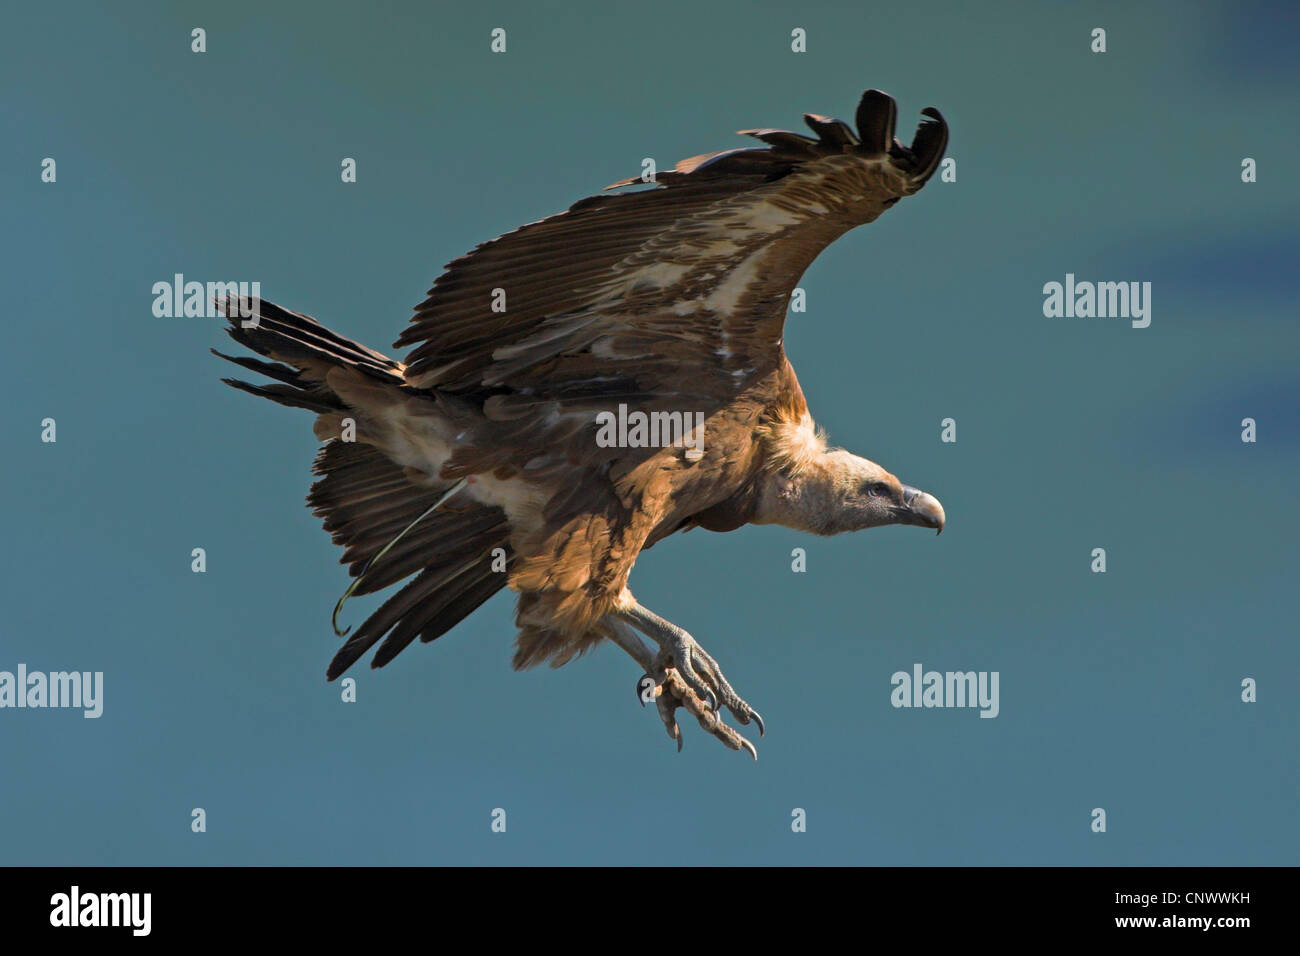 griffon vulture (Gyps fulvus), flying with the claws stretched out, Spain, Extremadura Stock Photo